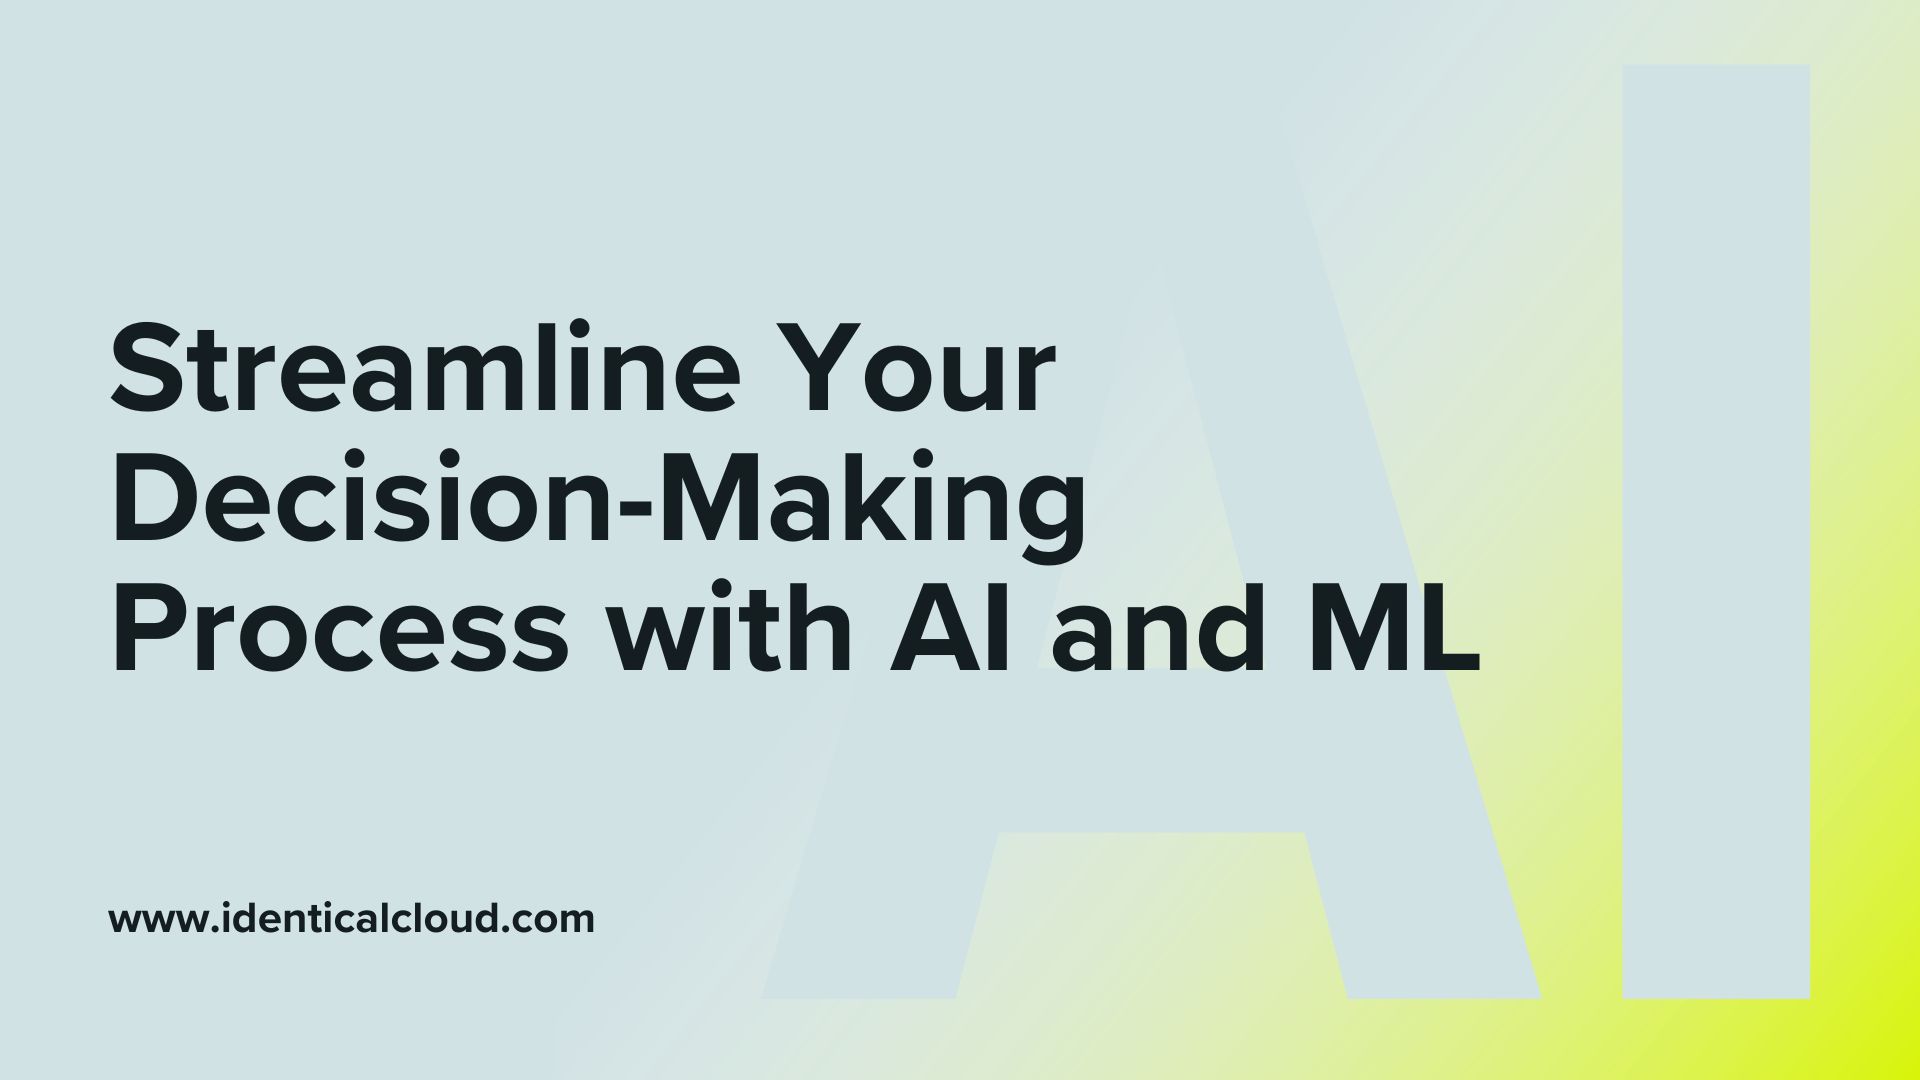 Streamline Your Decision-Making Process with AI and ML